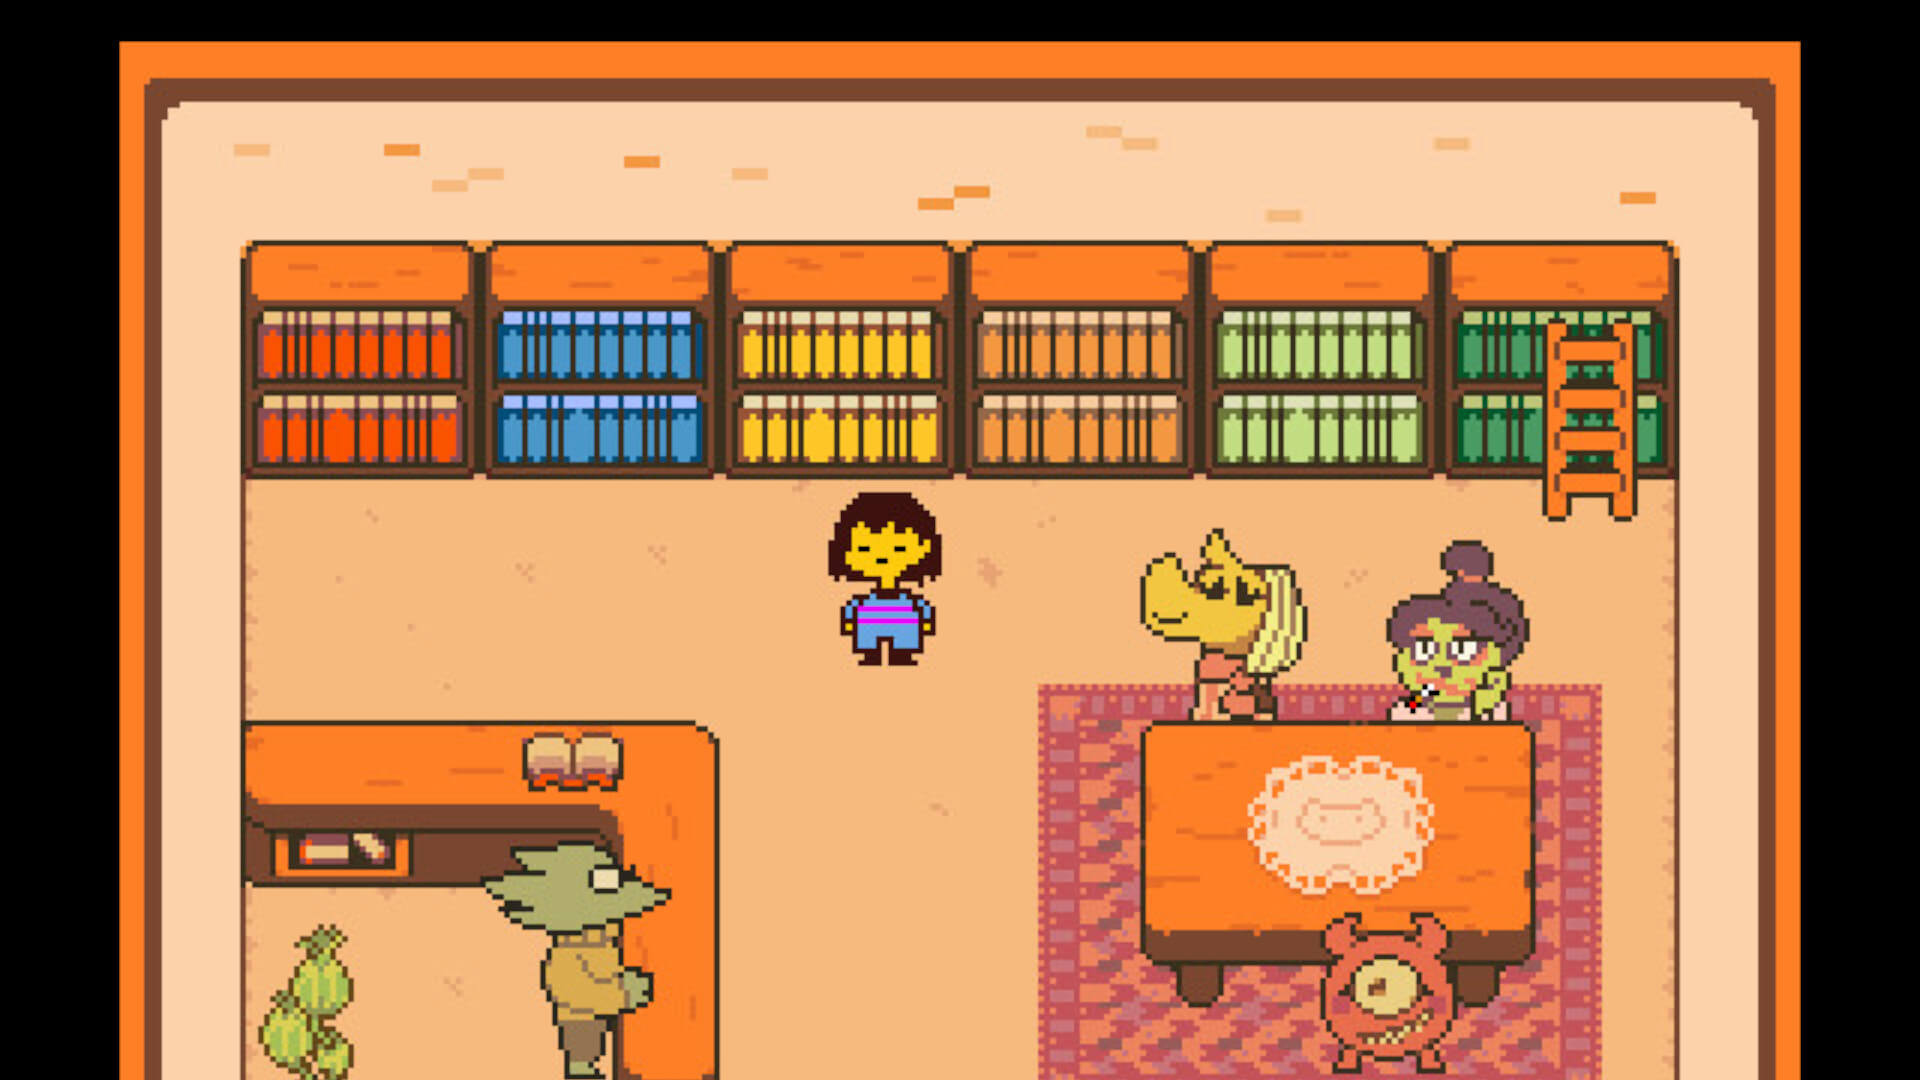 The player character standing in a library in Undertale